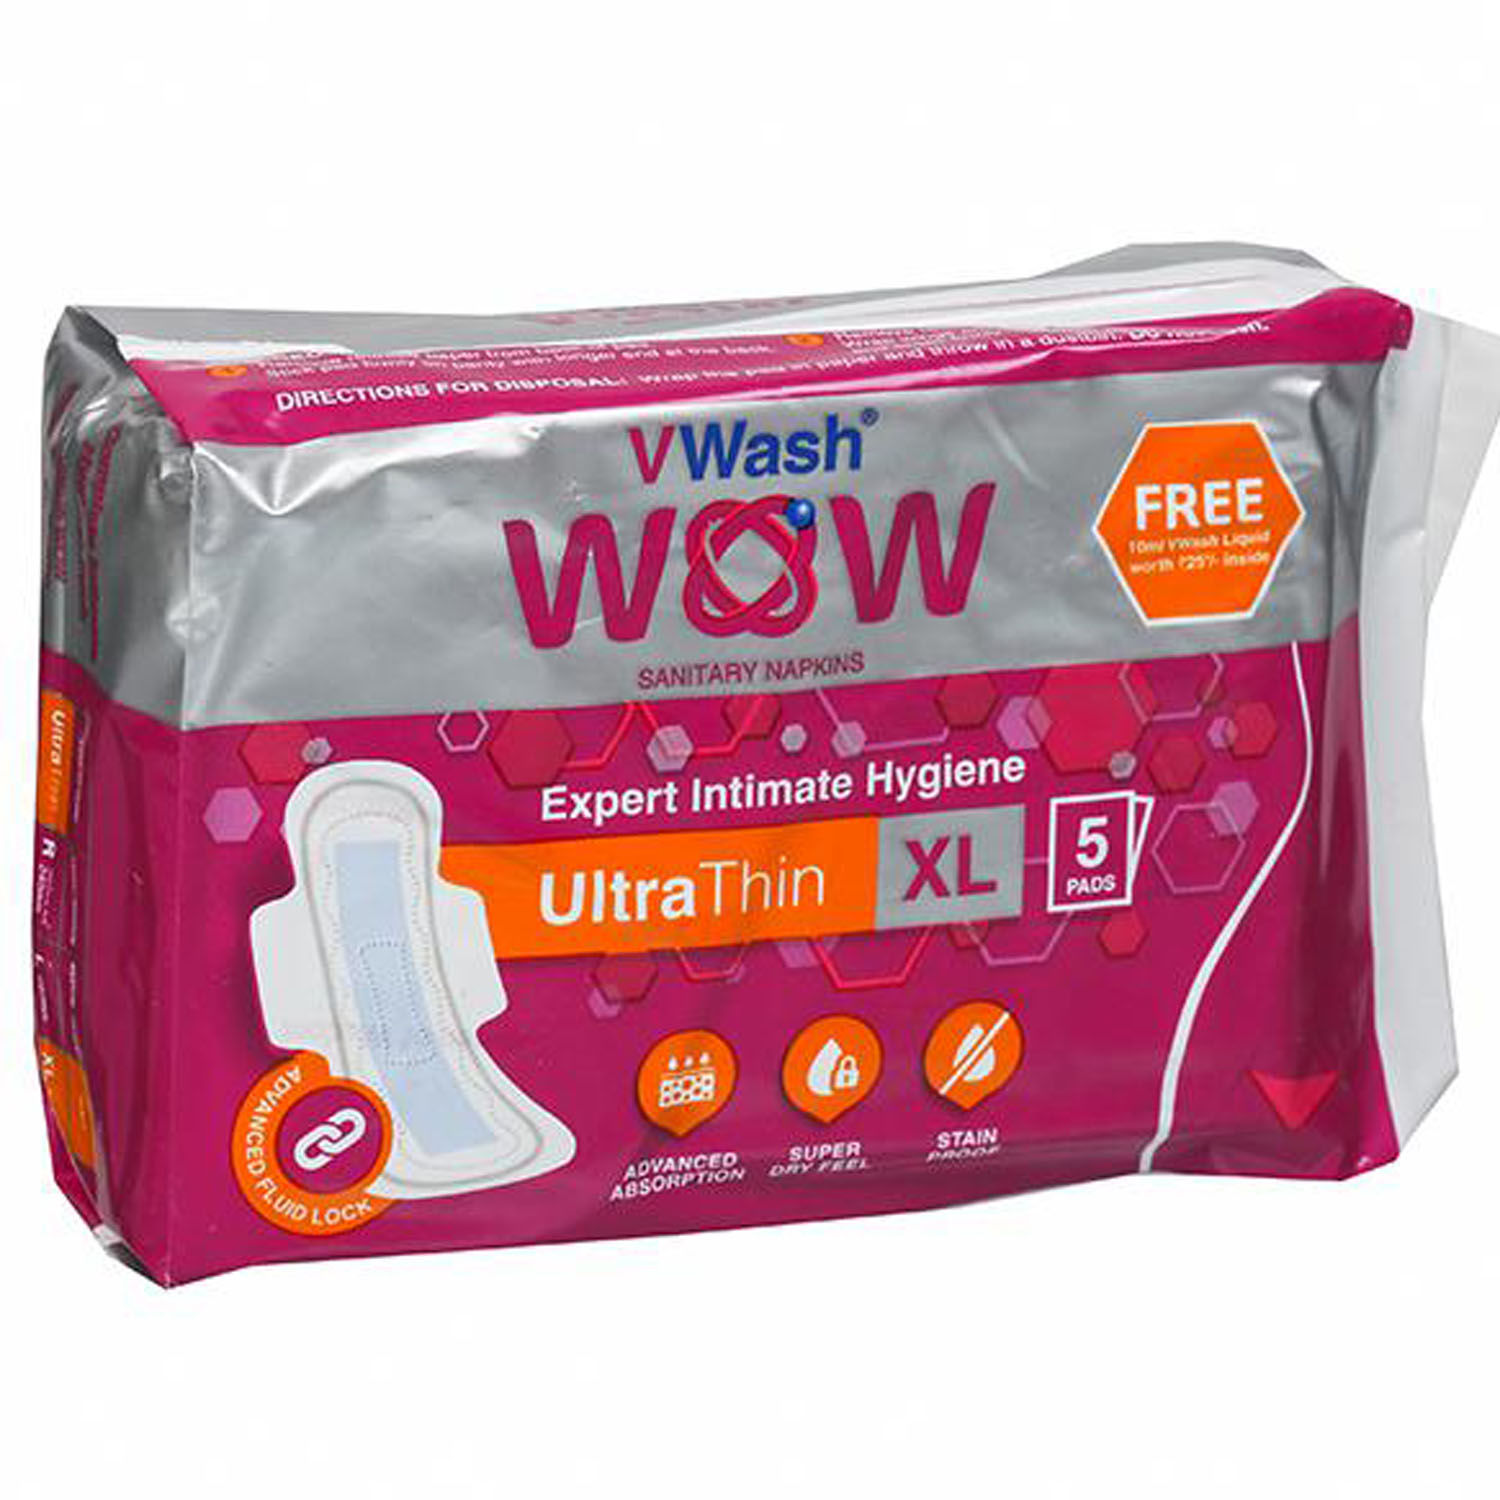 VWash Wow Ultra Thin Sanitary Napkins, XL, 5 Count, Pack of 1 